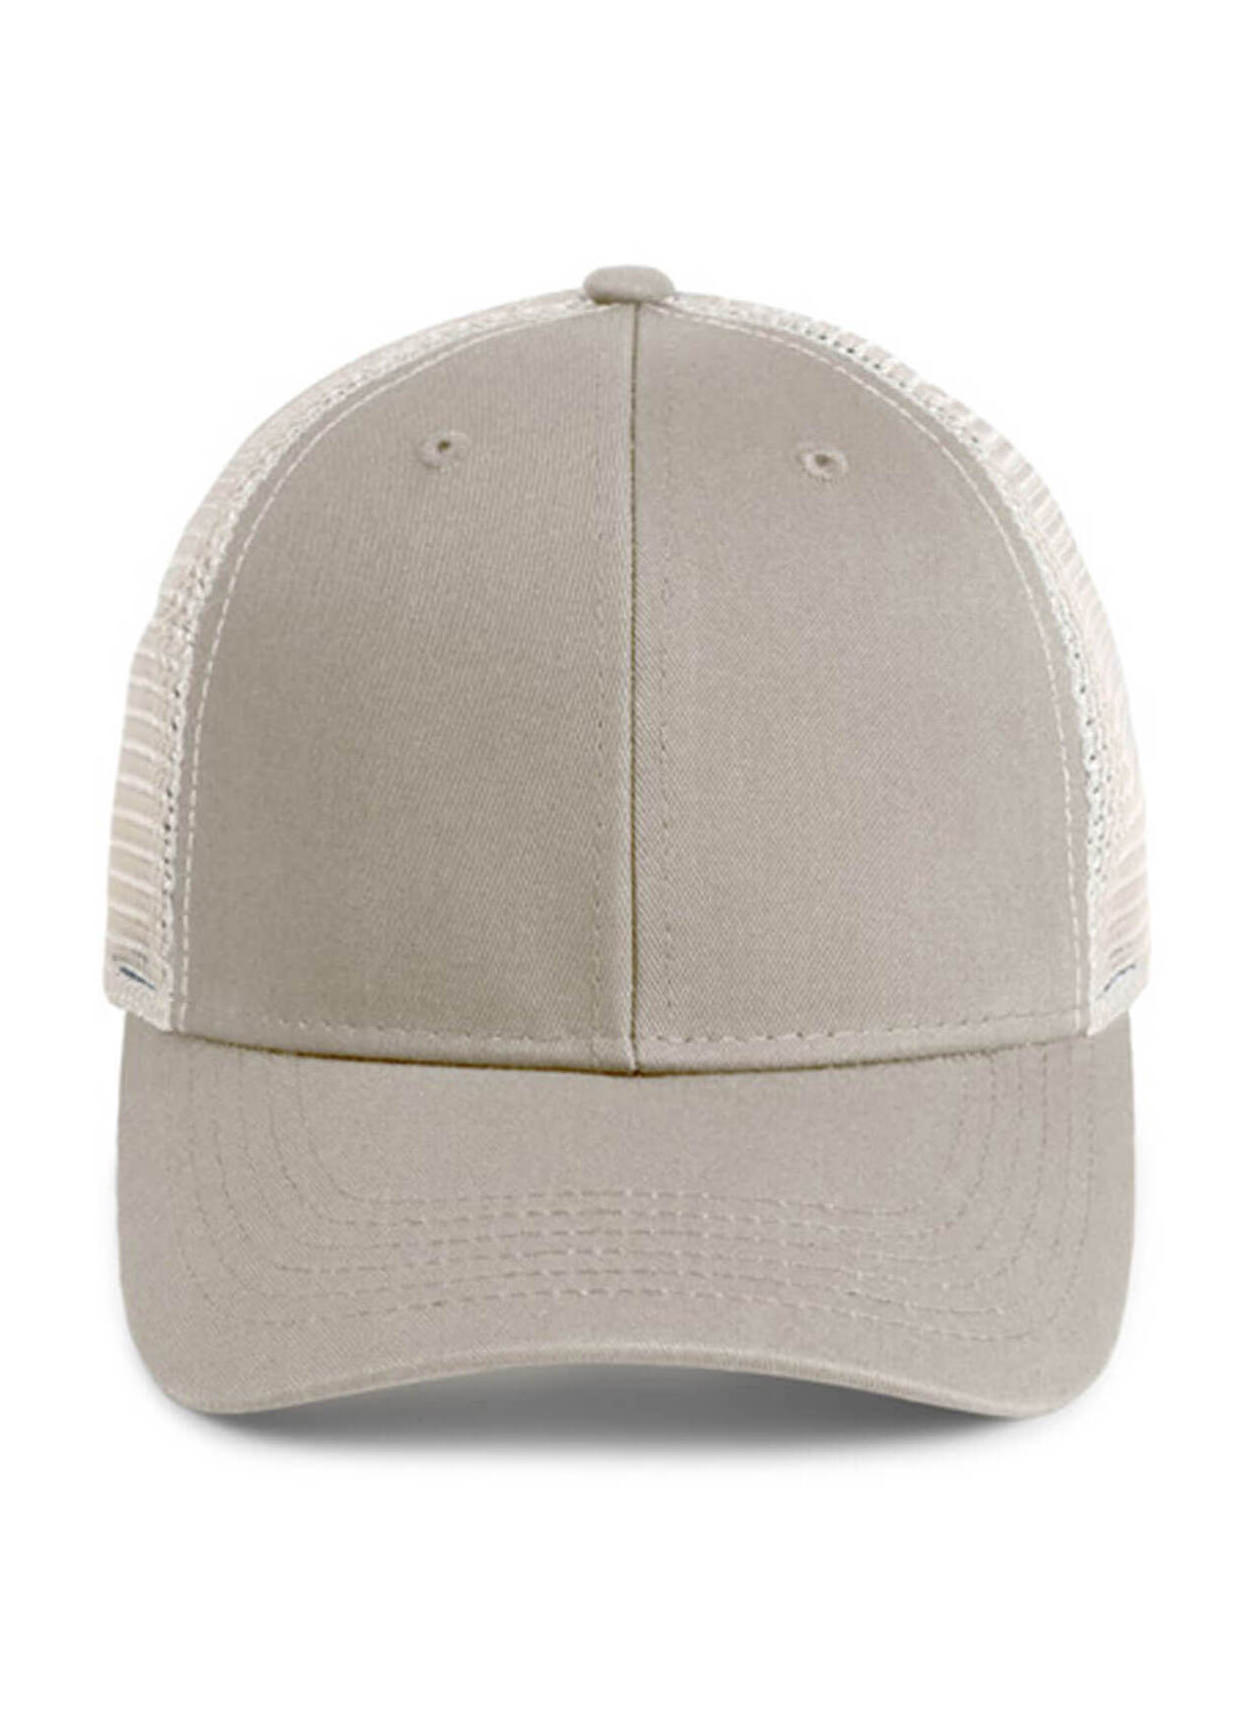 Imperial Khaki / Stone The Catch & Release Hat Adjustable Meshback Hat